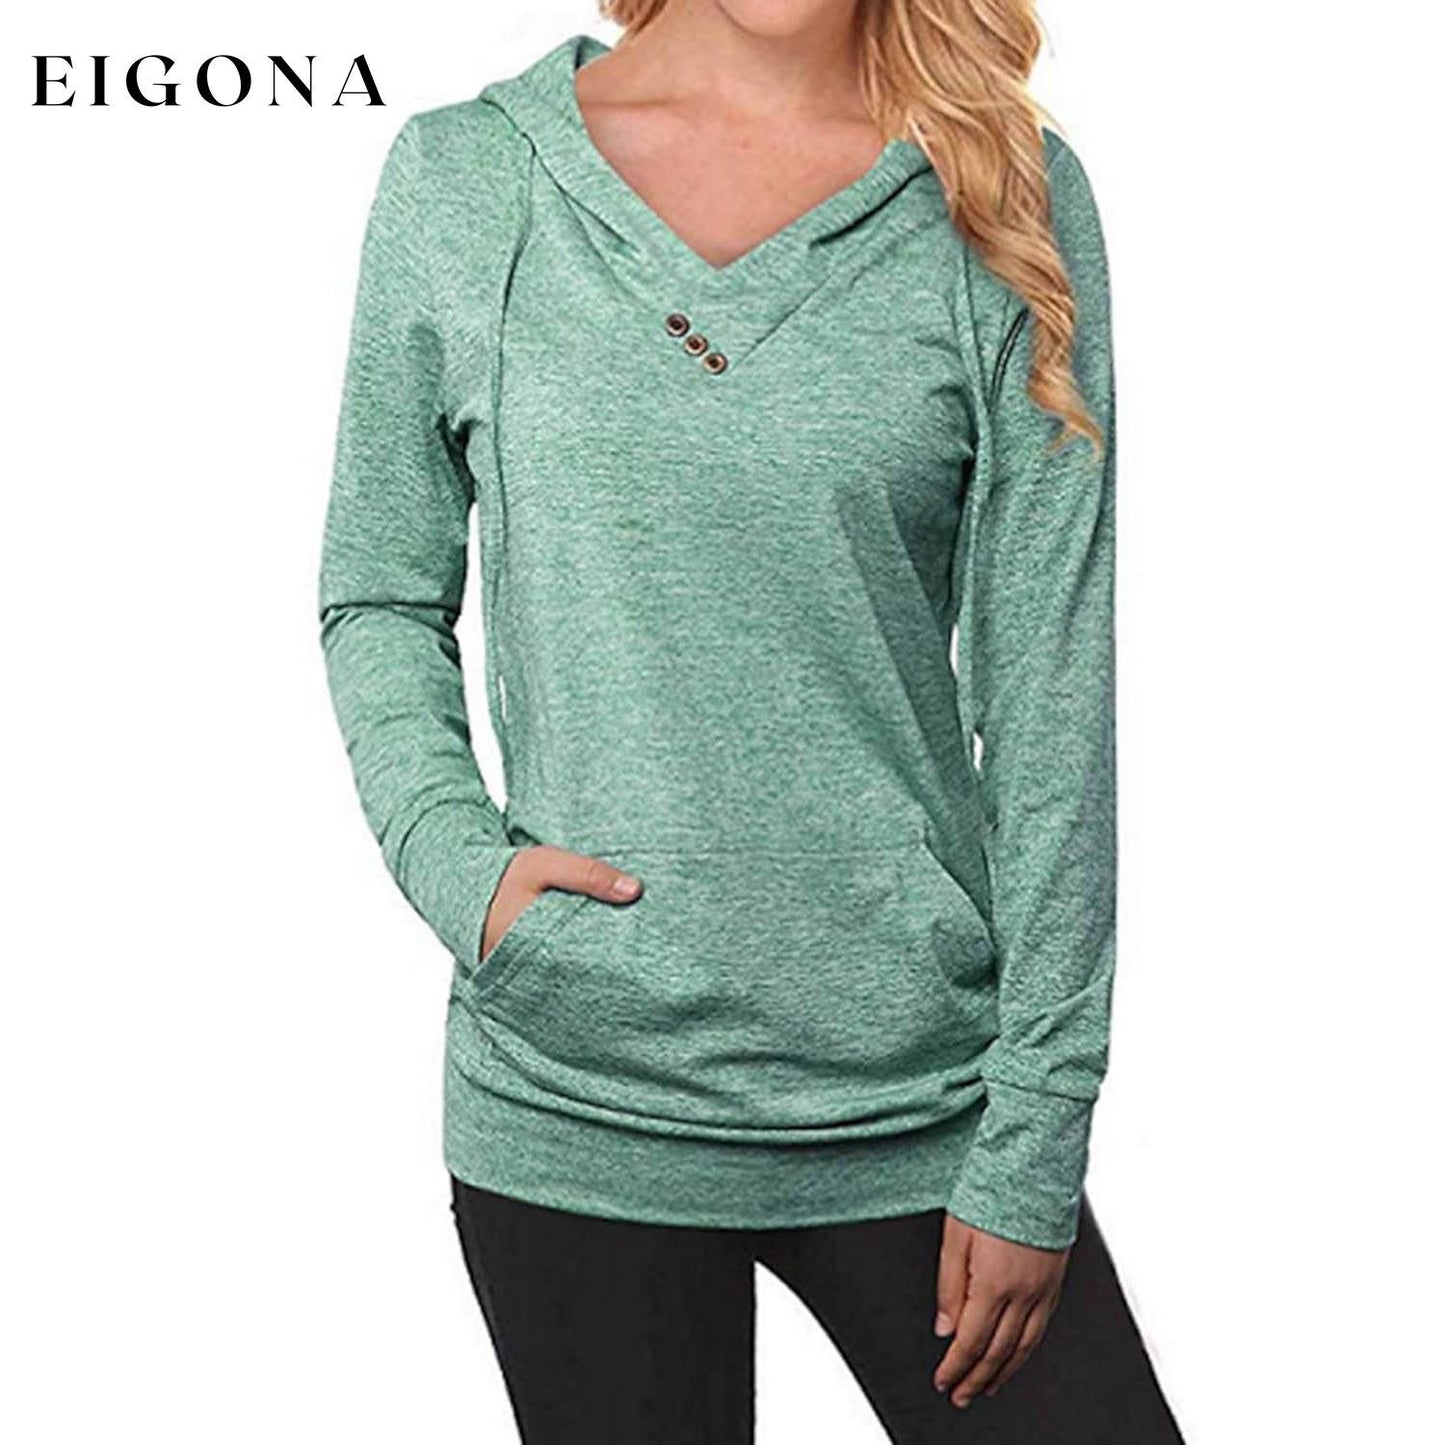 Women's Hoodie Sweatshirt Plain Lace Up Front Pocket Green __stock:200 clothes refund_fee:800 tops